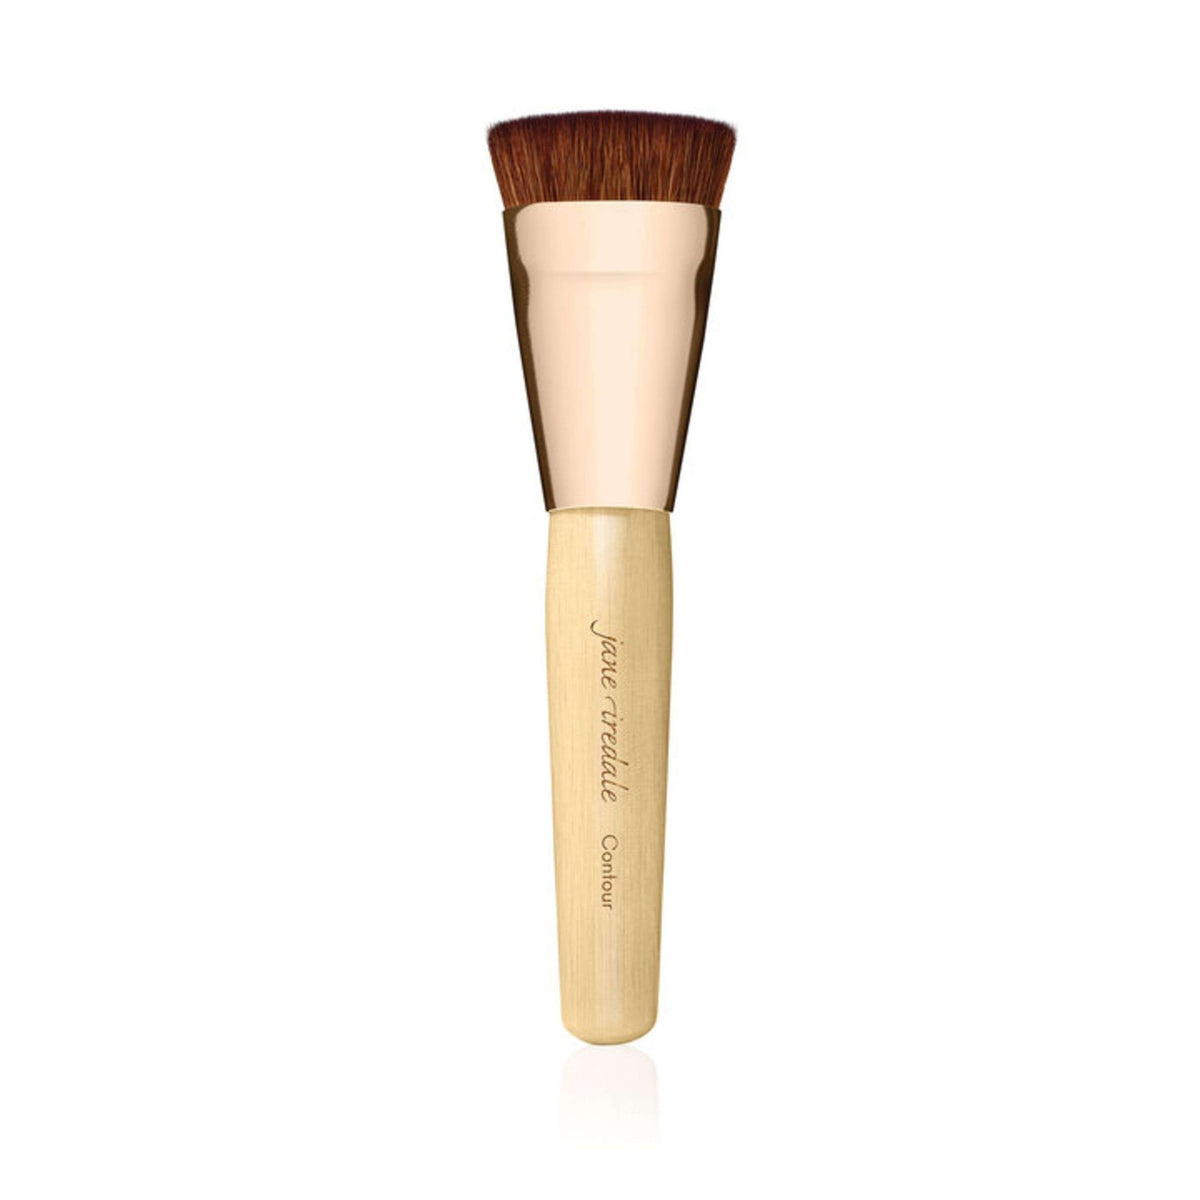 Jane Iredale Contour Brush at Socialite Beauty Canada